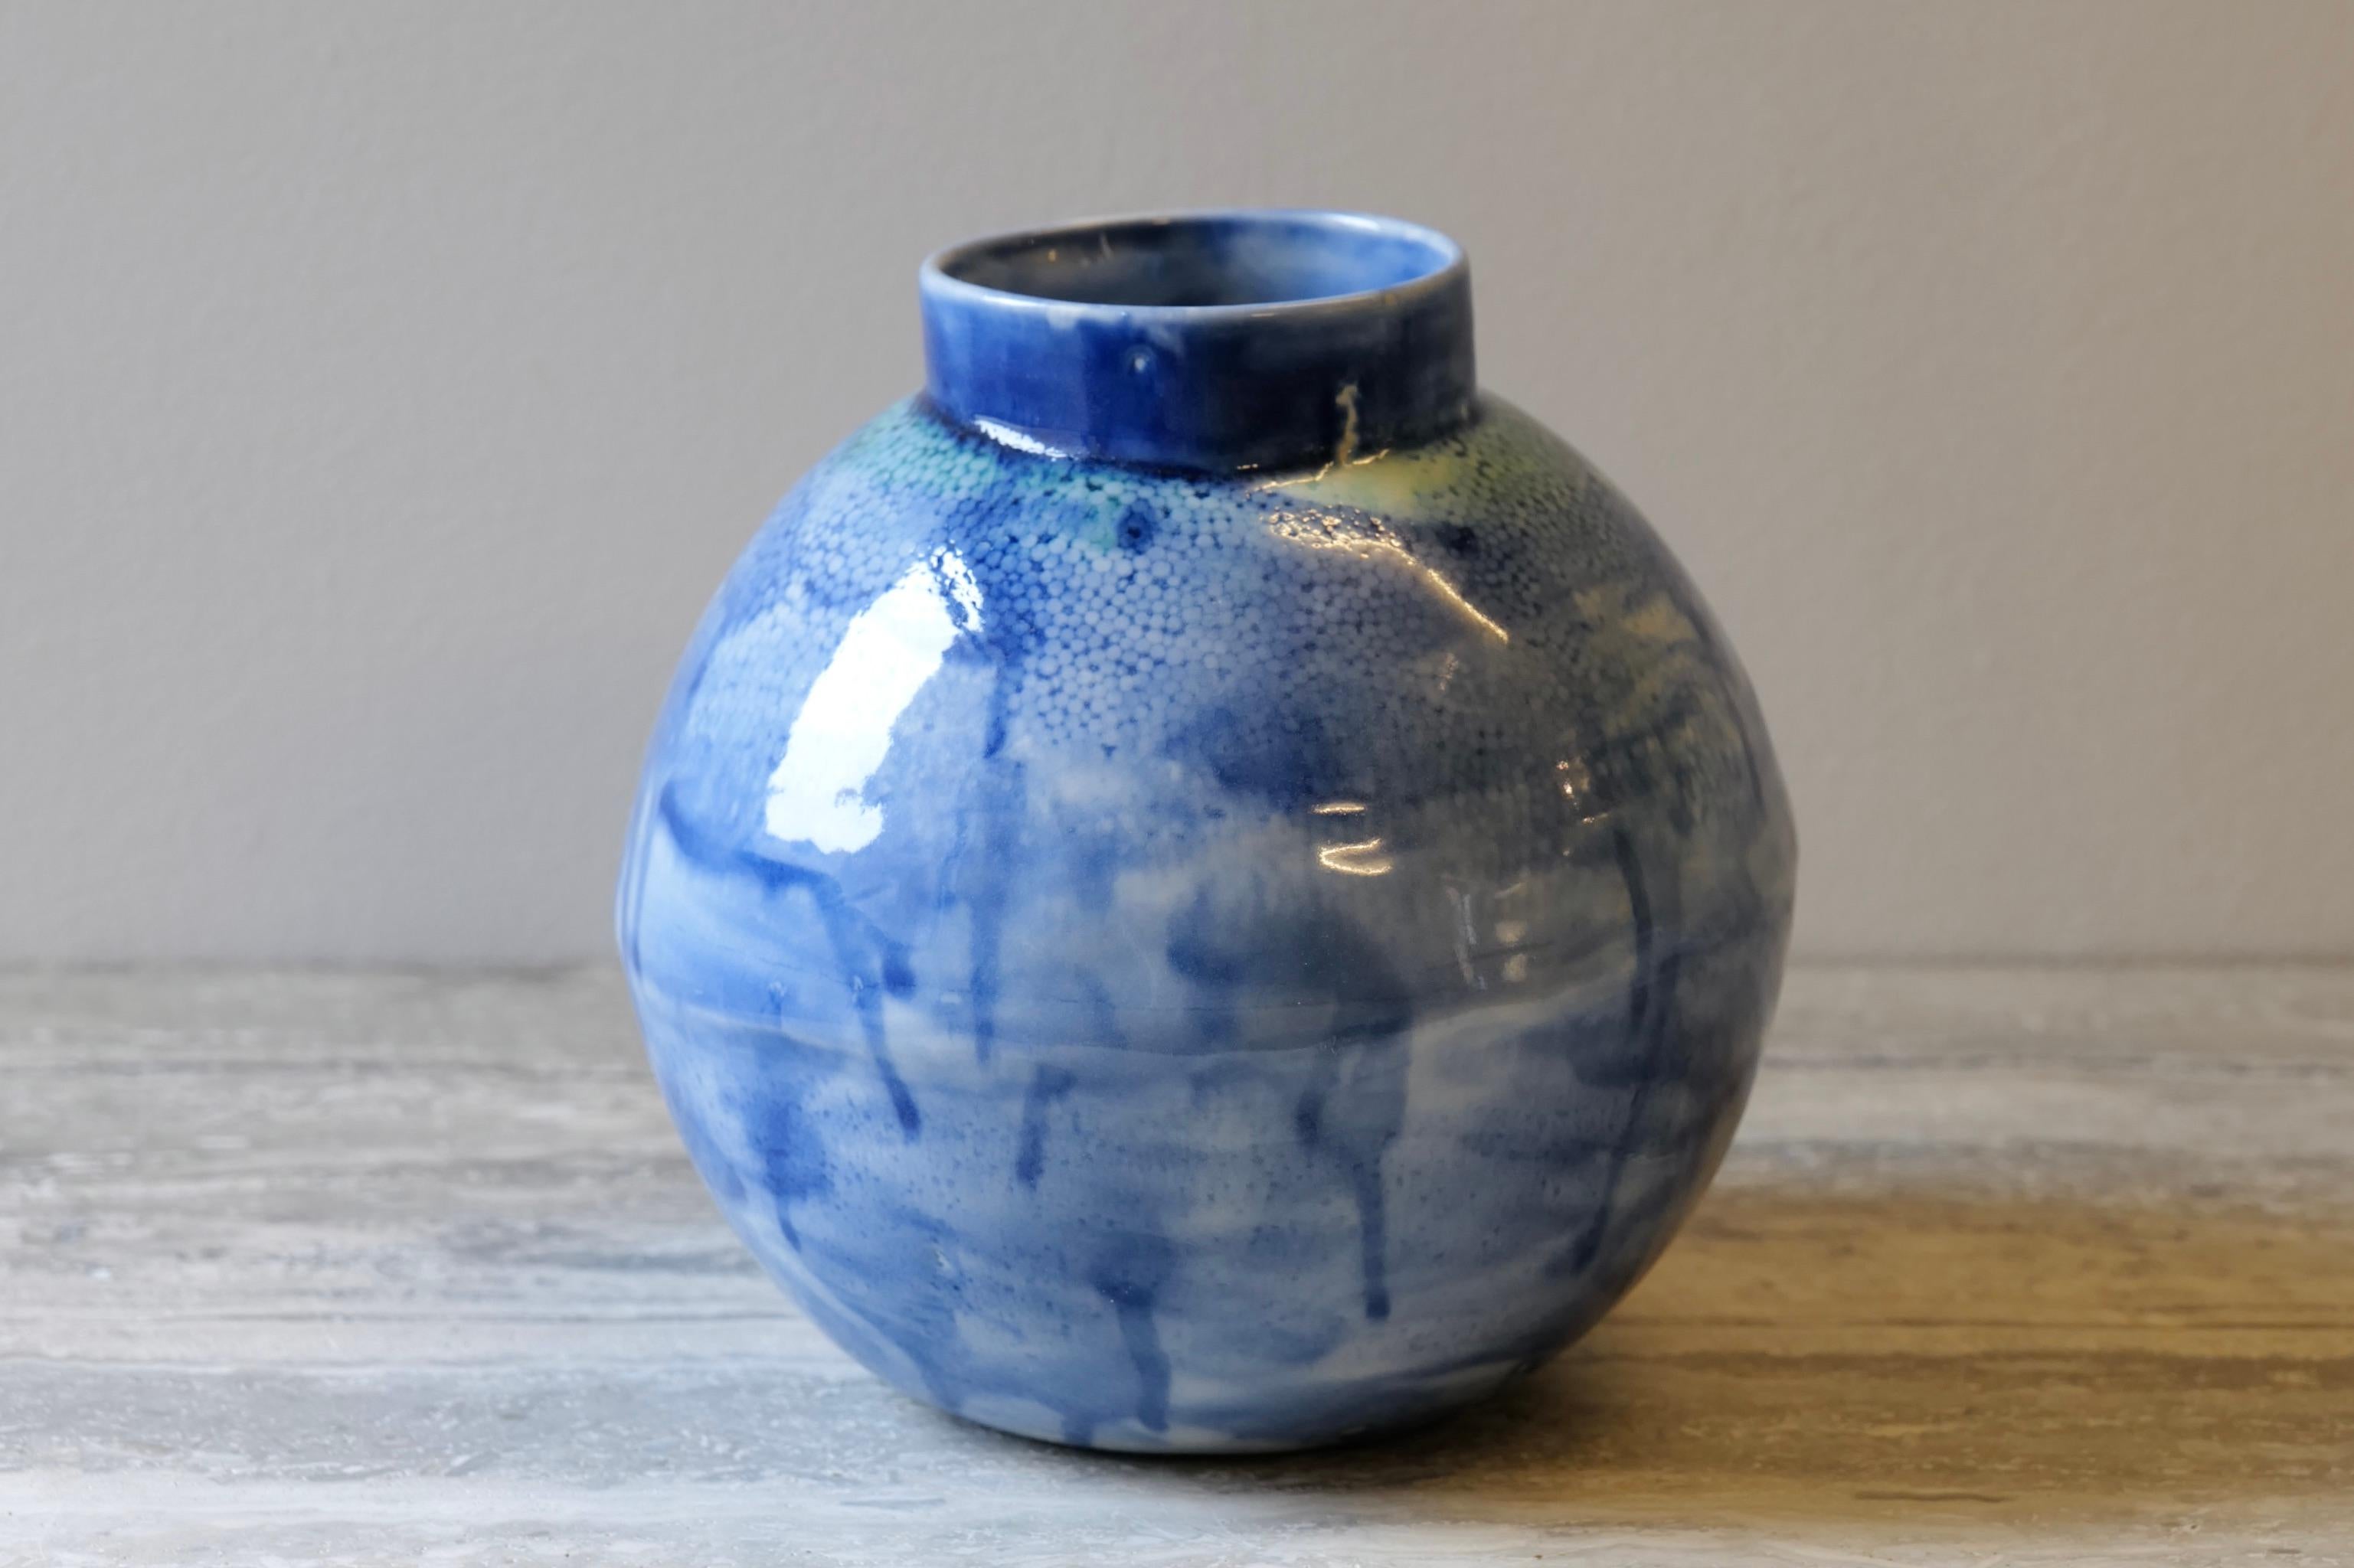 Large spherical orb-like centerpiece. Taking modern inspiration in the form as well as harkening to Japanese tradition in the lip of the vase. The slip-cast porcelain piece has a subtle spherical texture that ranges across the surface. Painted with